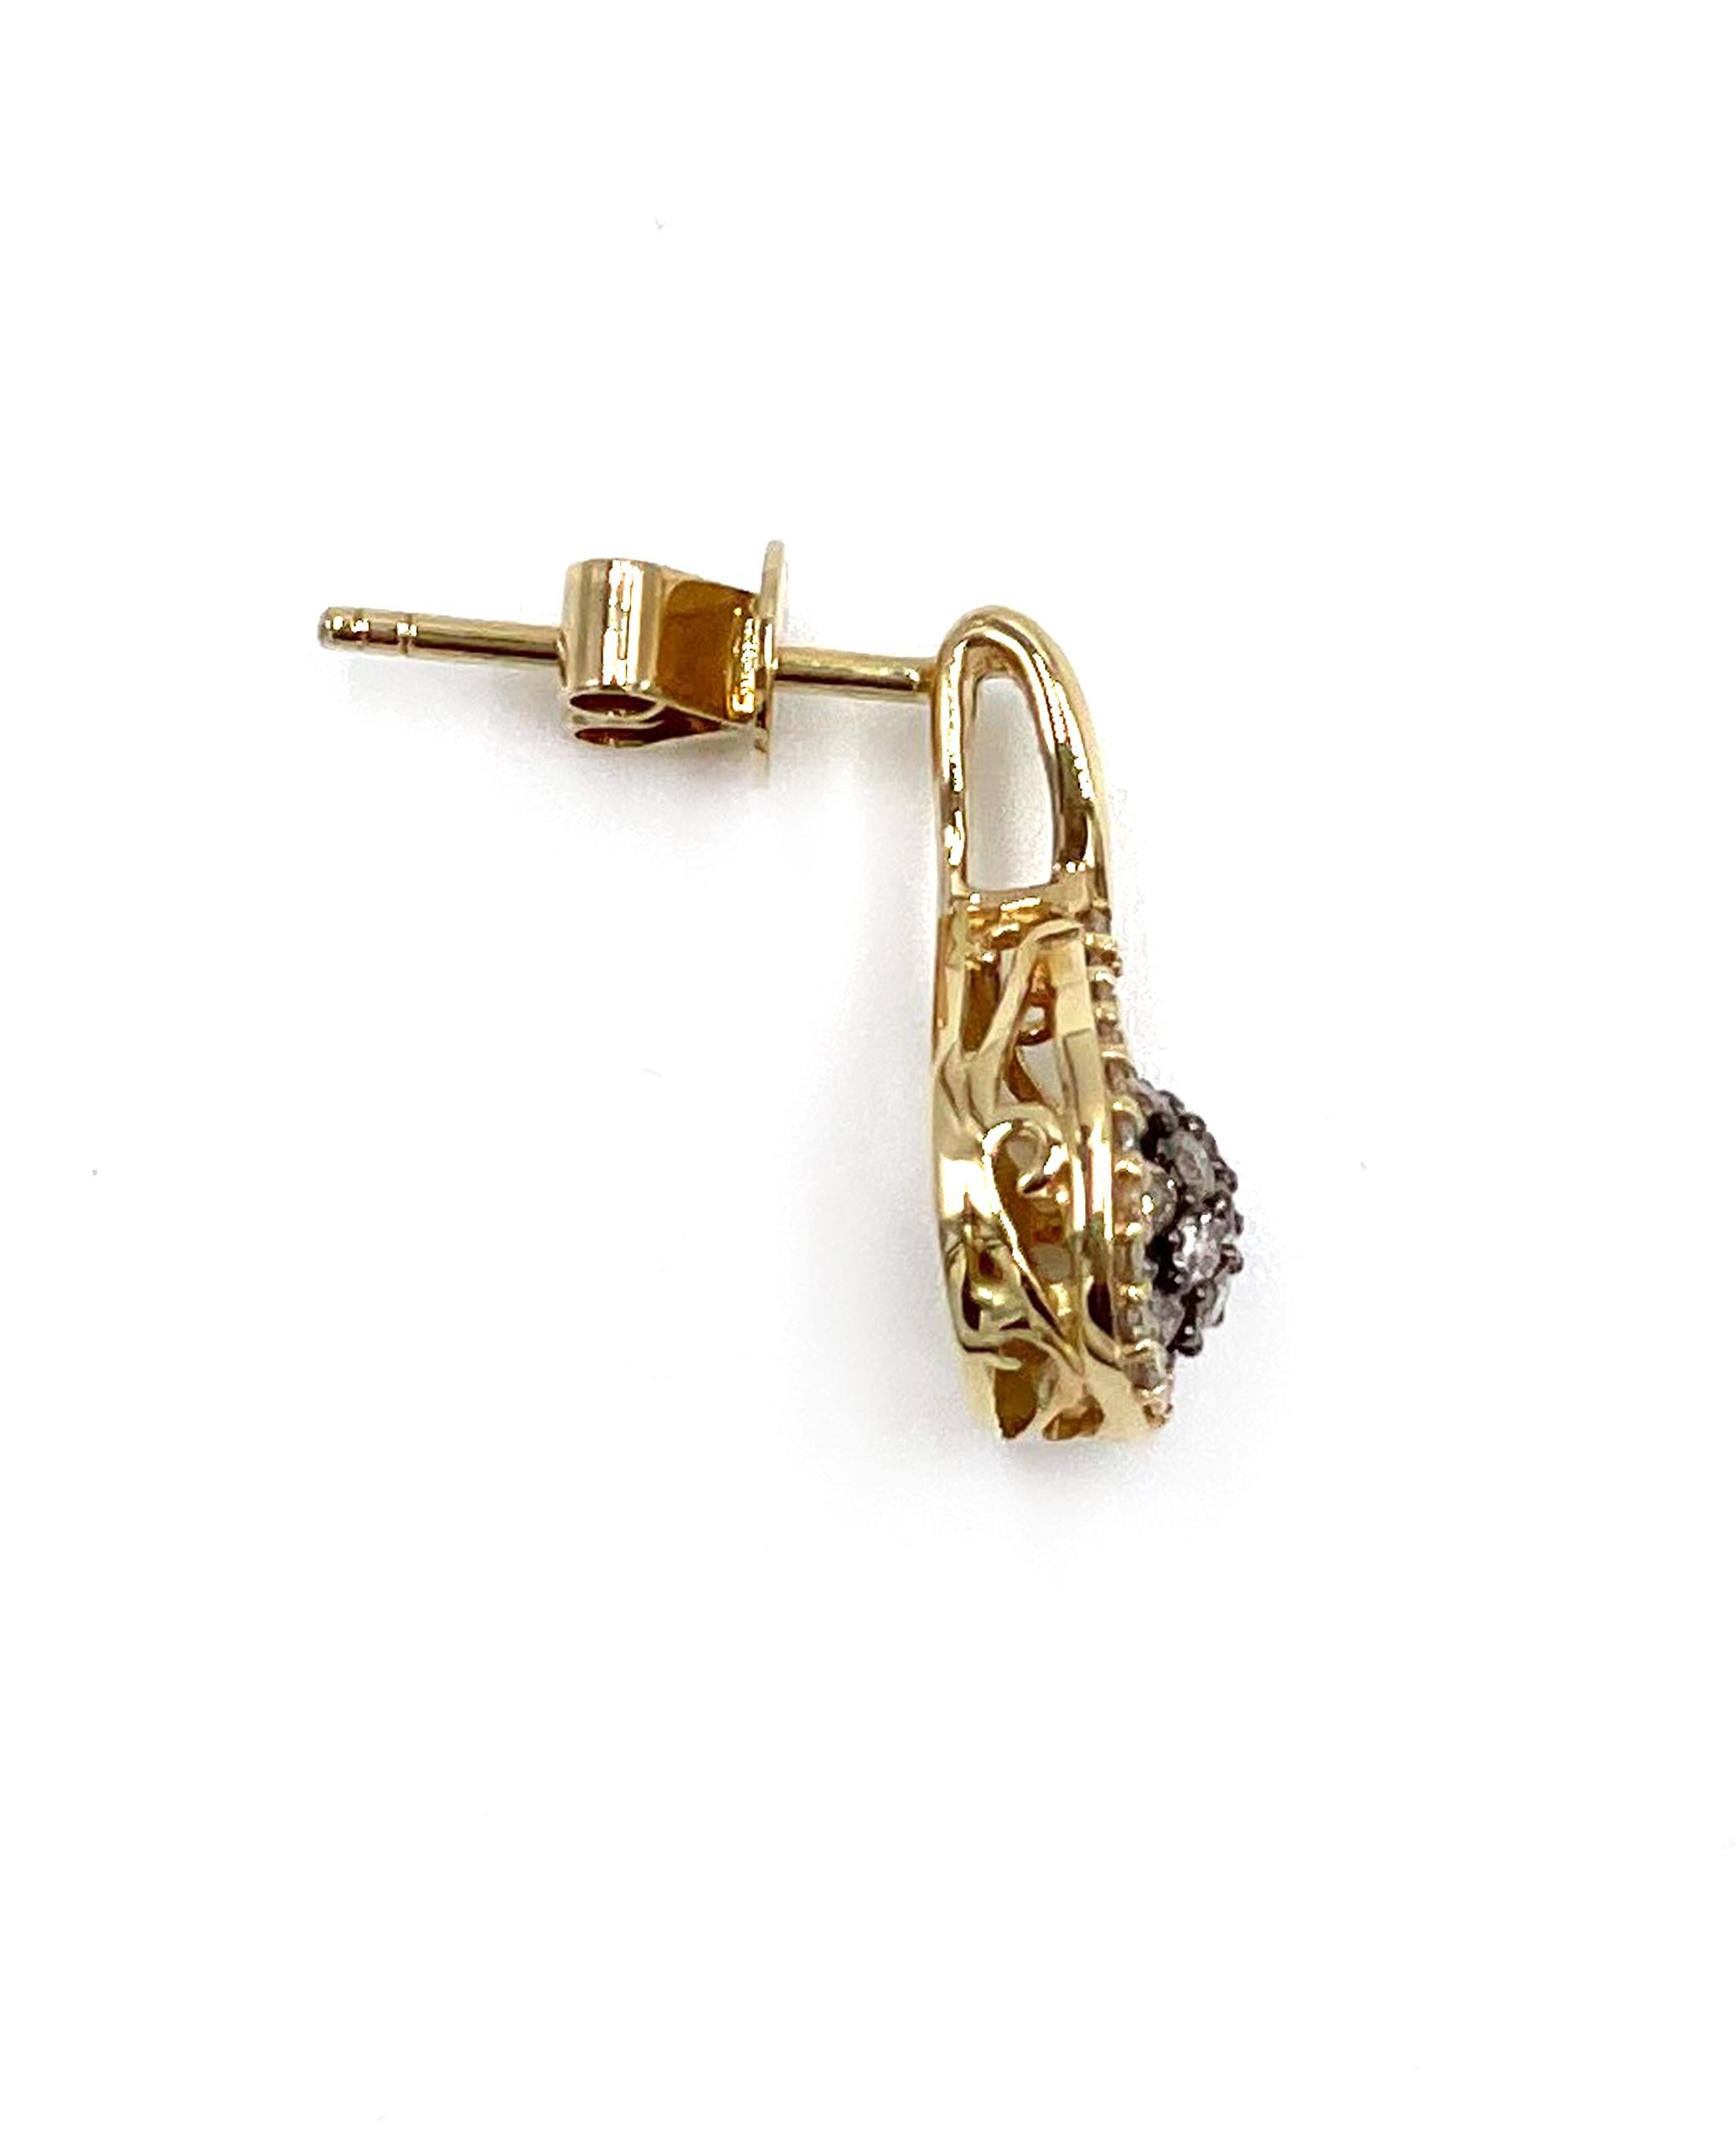 Pair of Le Vian 14K yellow gold earrings with white and chocolate brown diamonds totaling 0.36 carats.